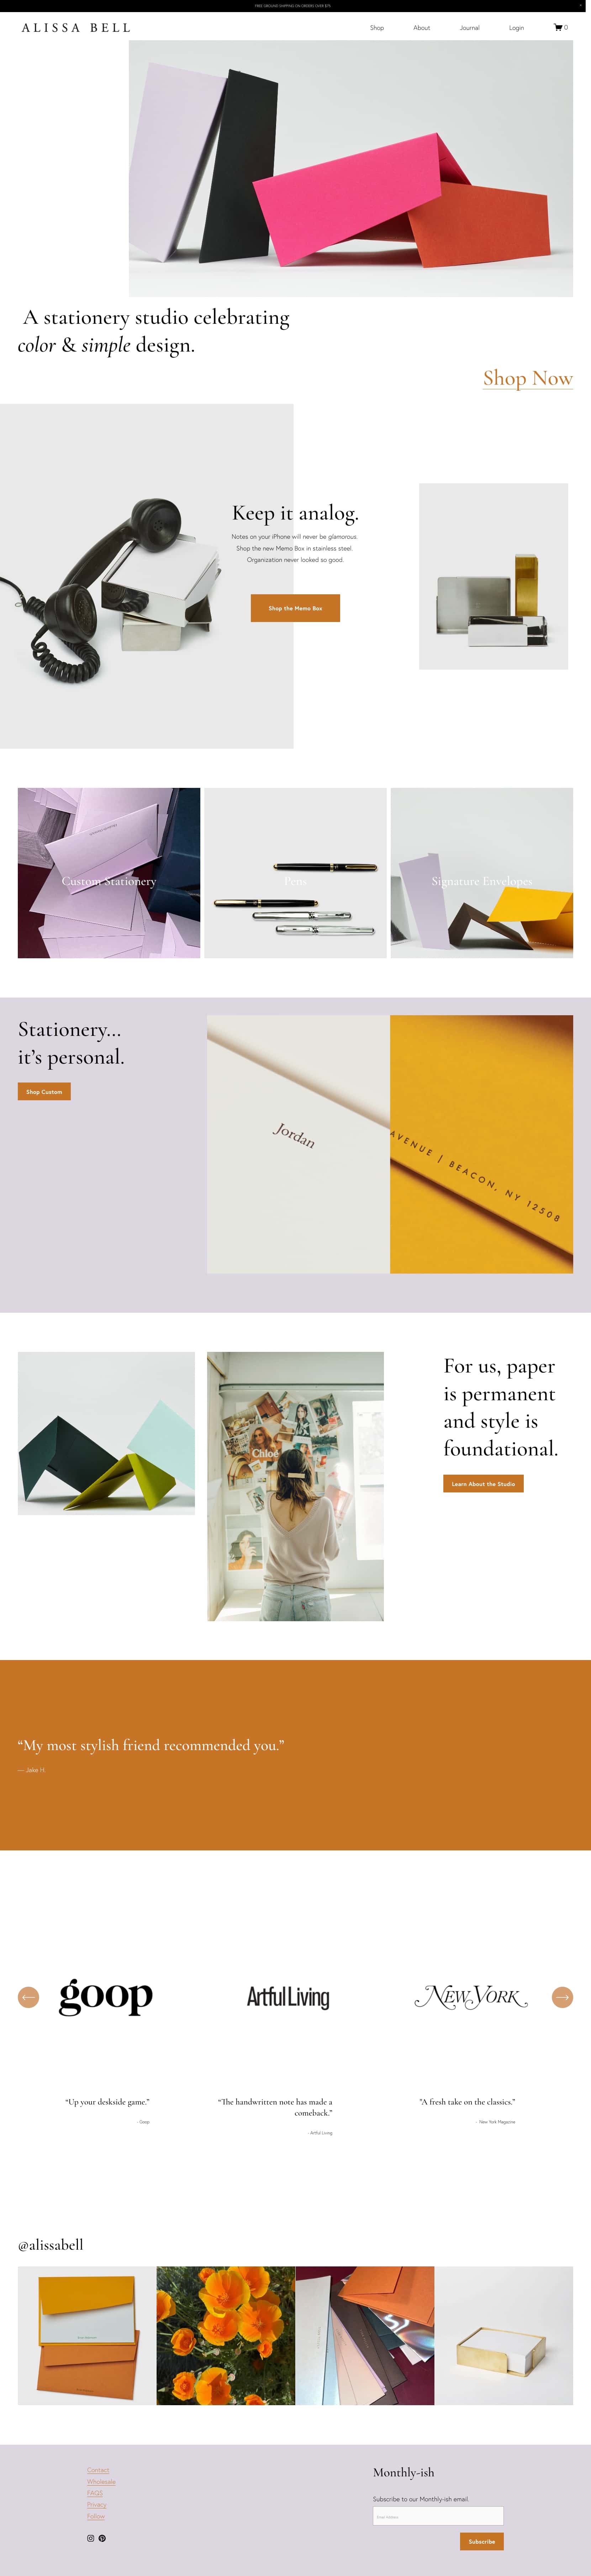 Squarespace Ecommerce Ex. 14: Alissa Bell - clean and elegant stationery website design